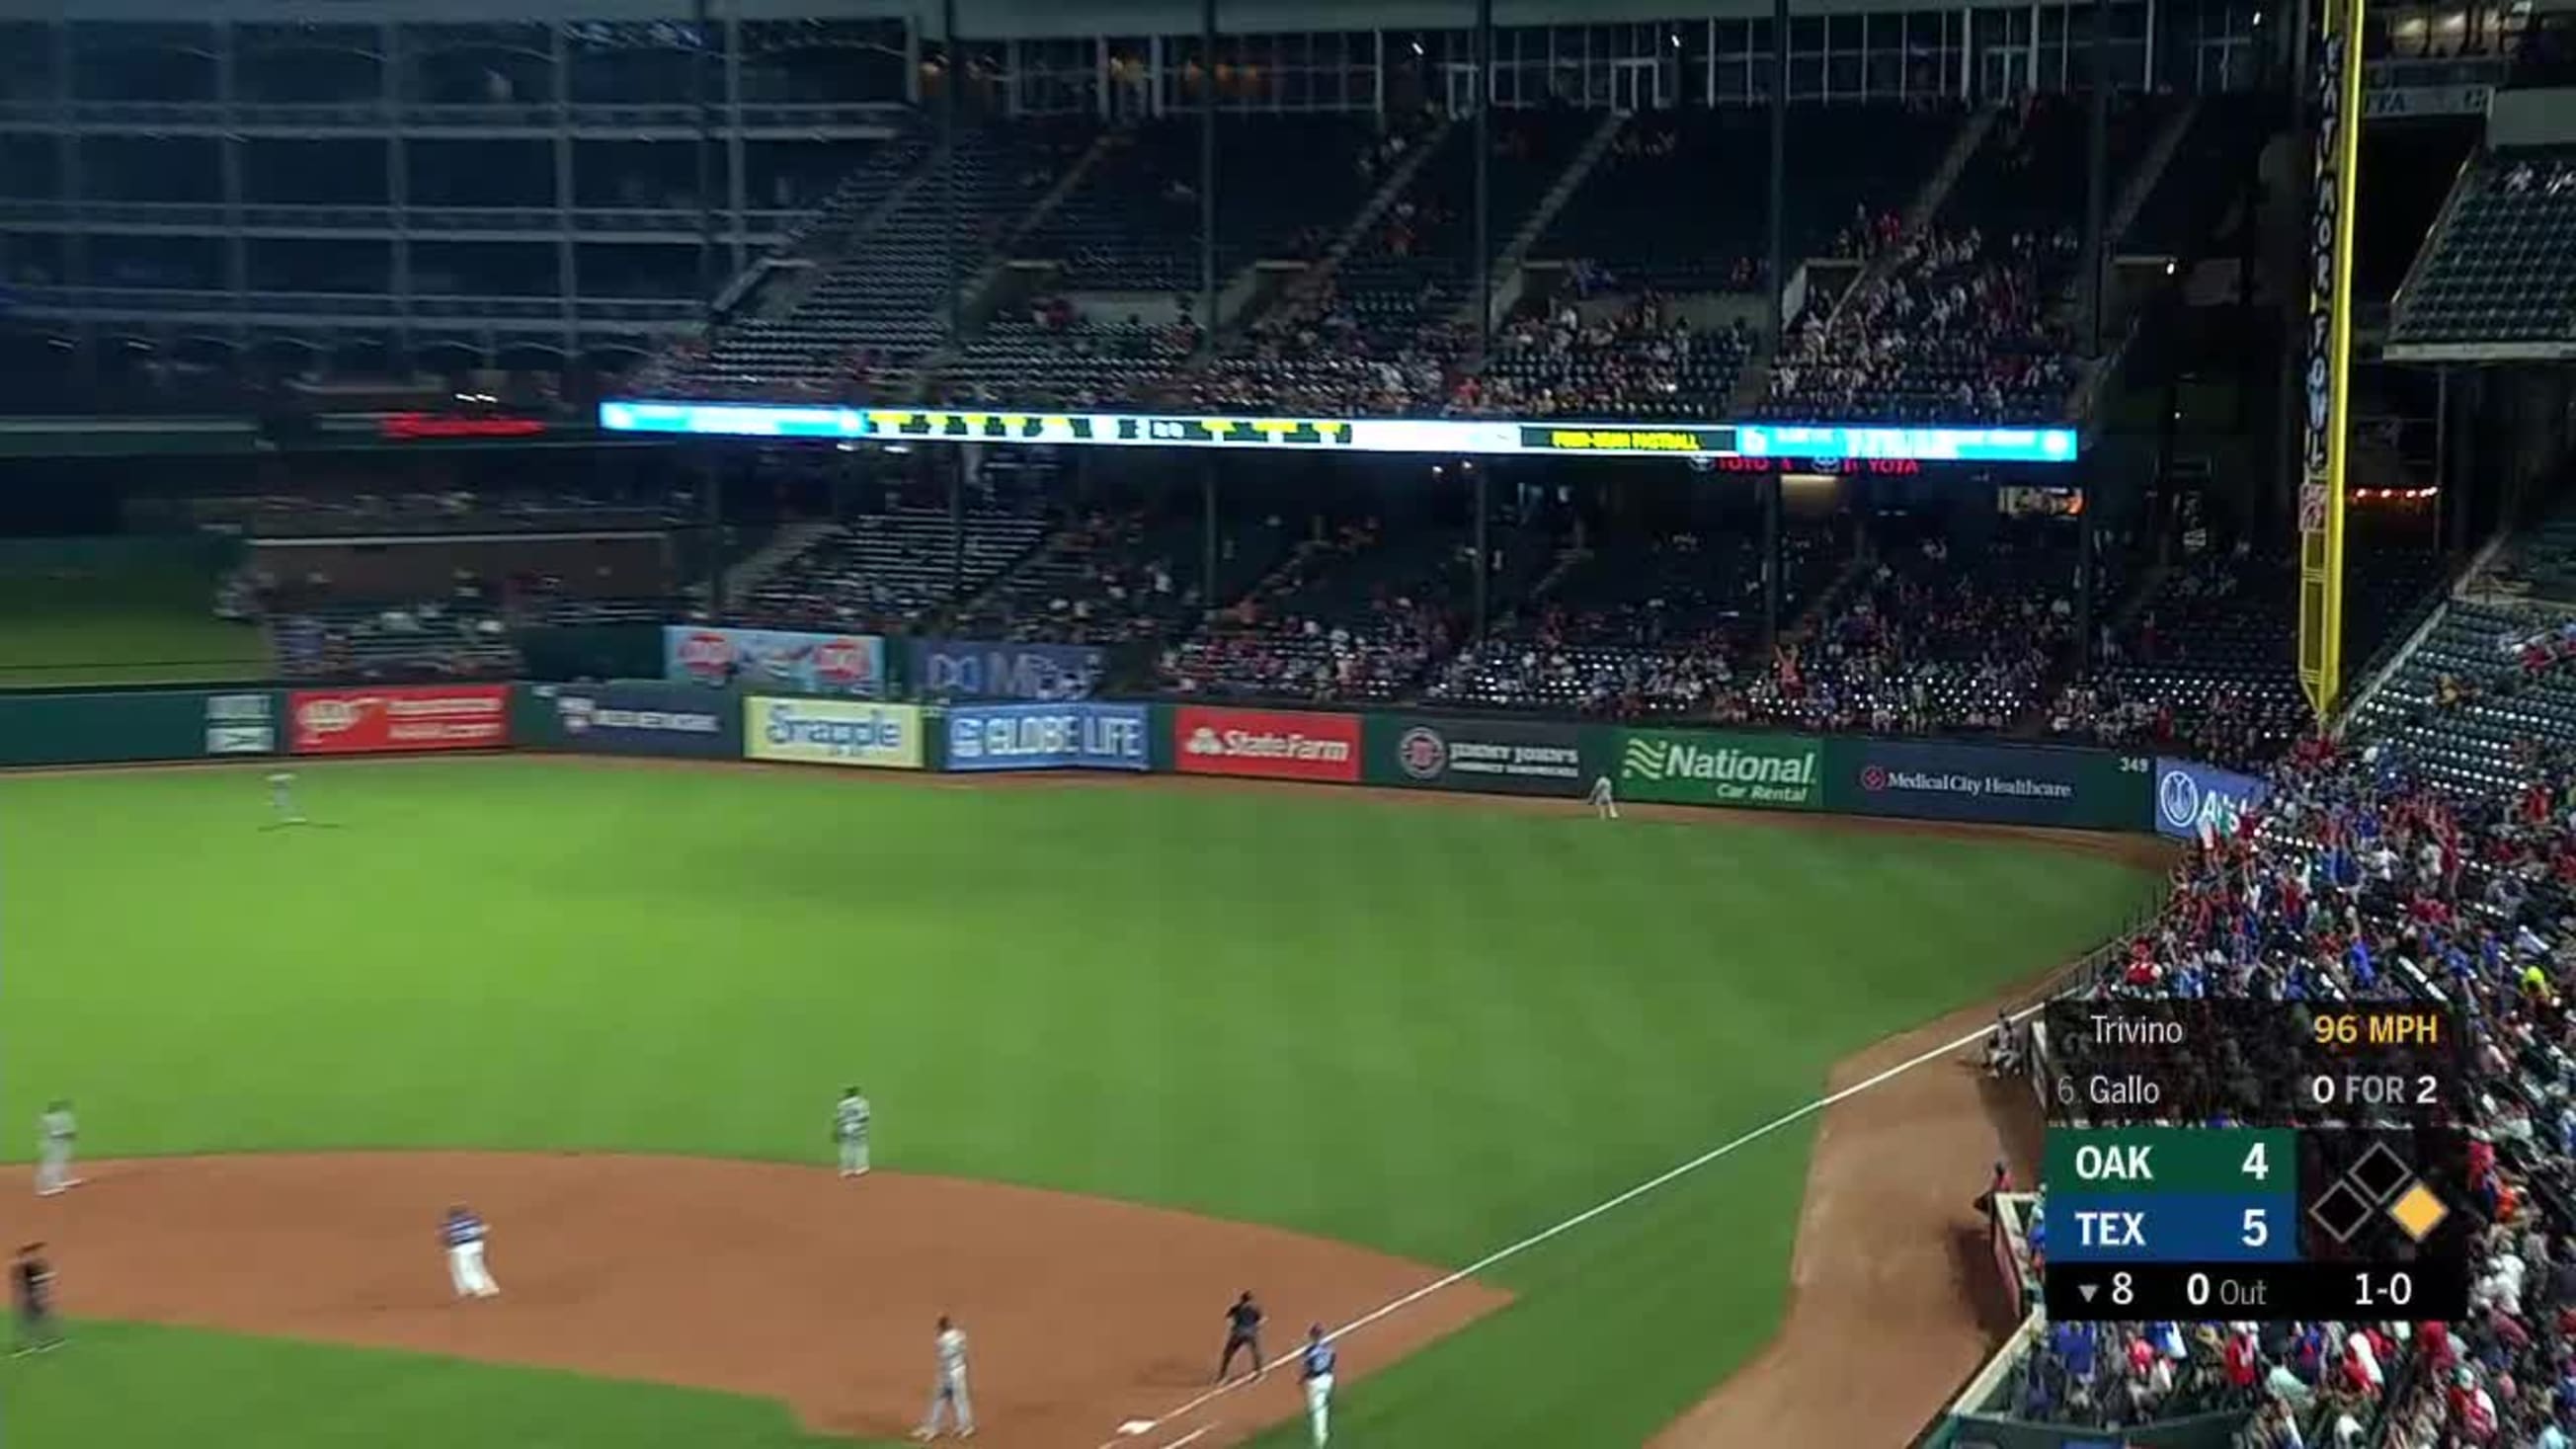 Joey Gallo singles on a line drive to right fielder Andrew